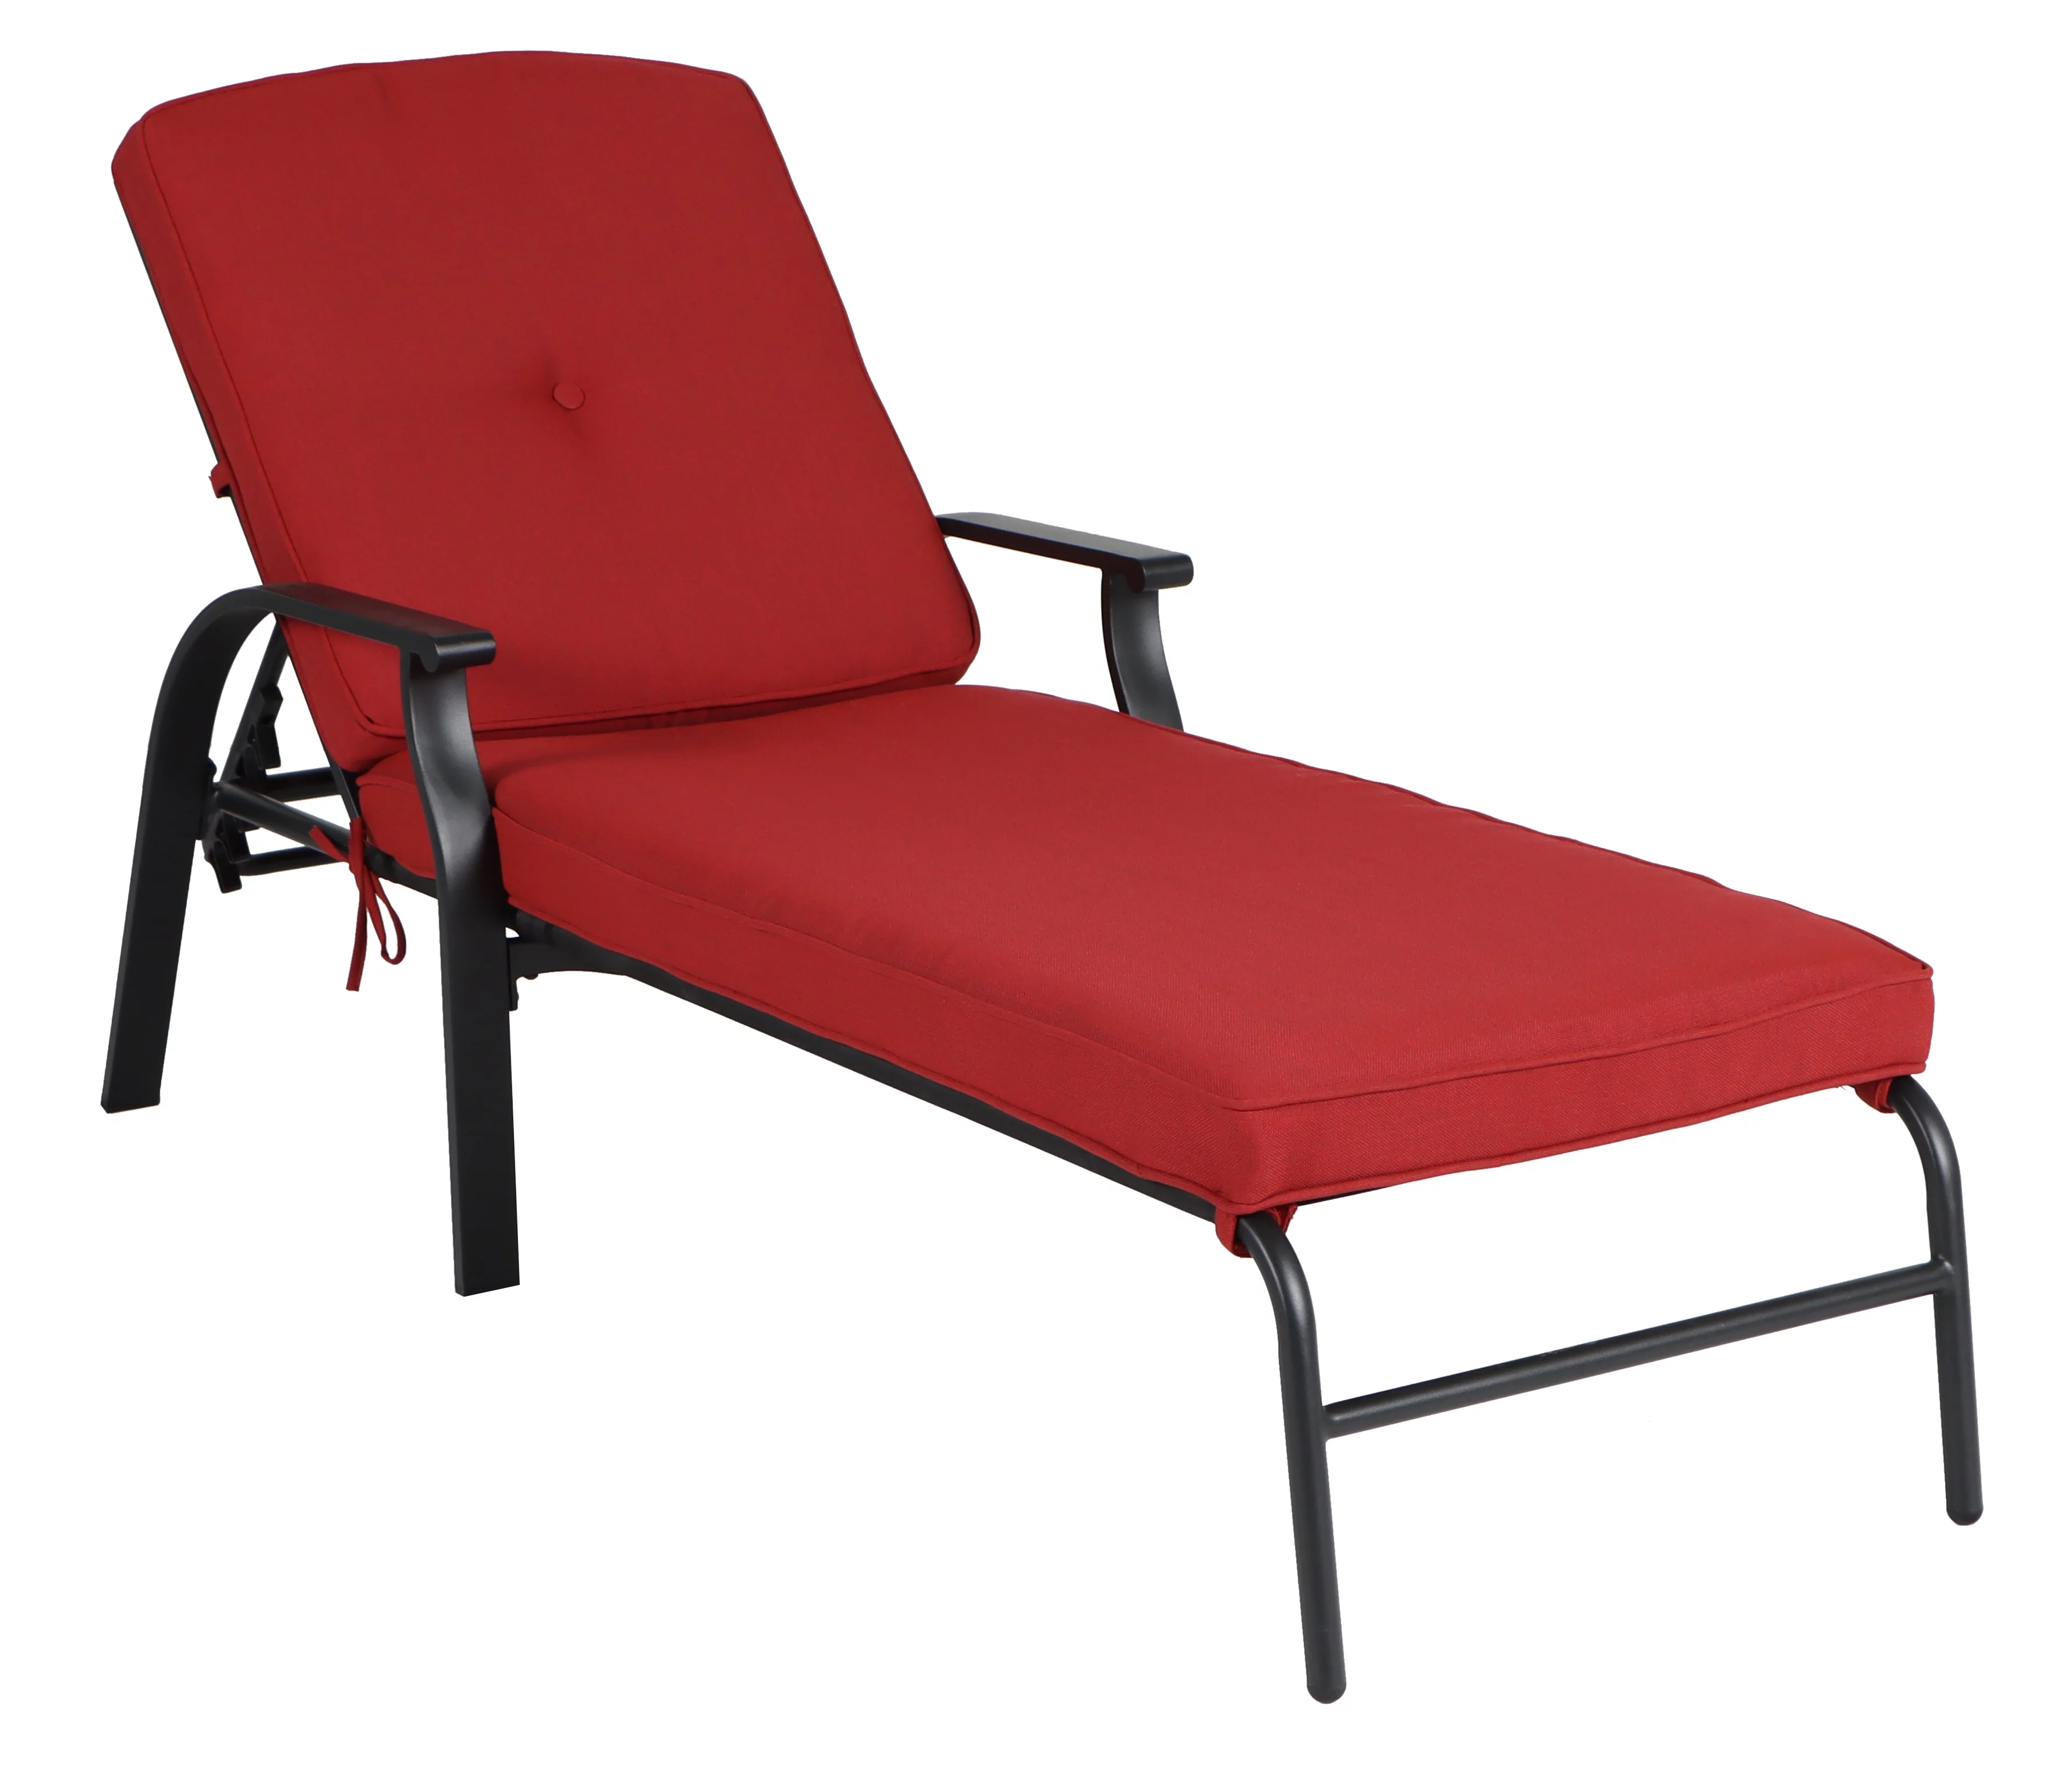 Mainstays Belden Park Cushion Steel Outdoor Chaise Lounge - Red